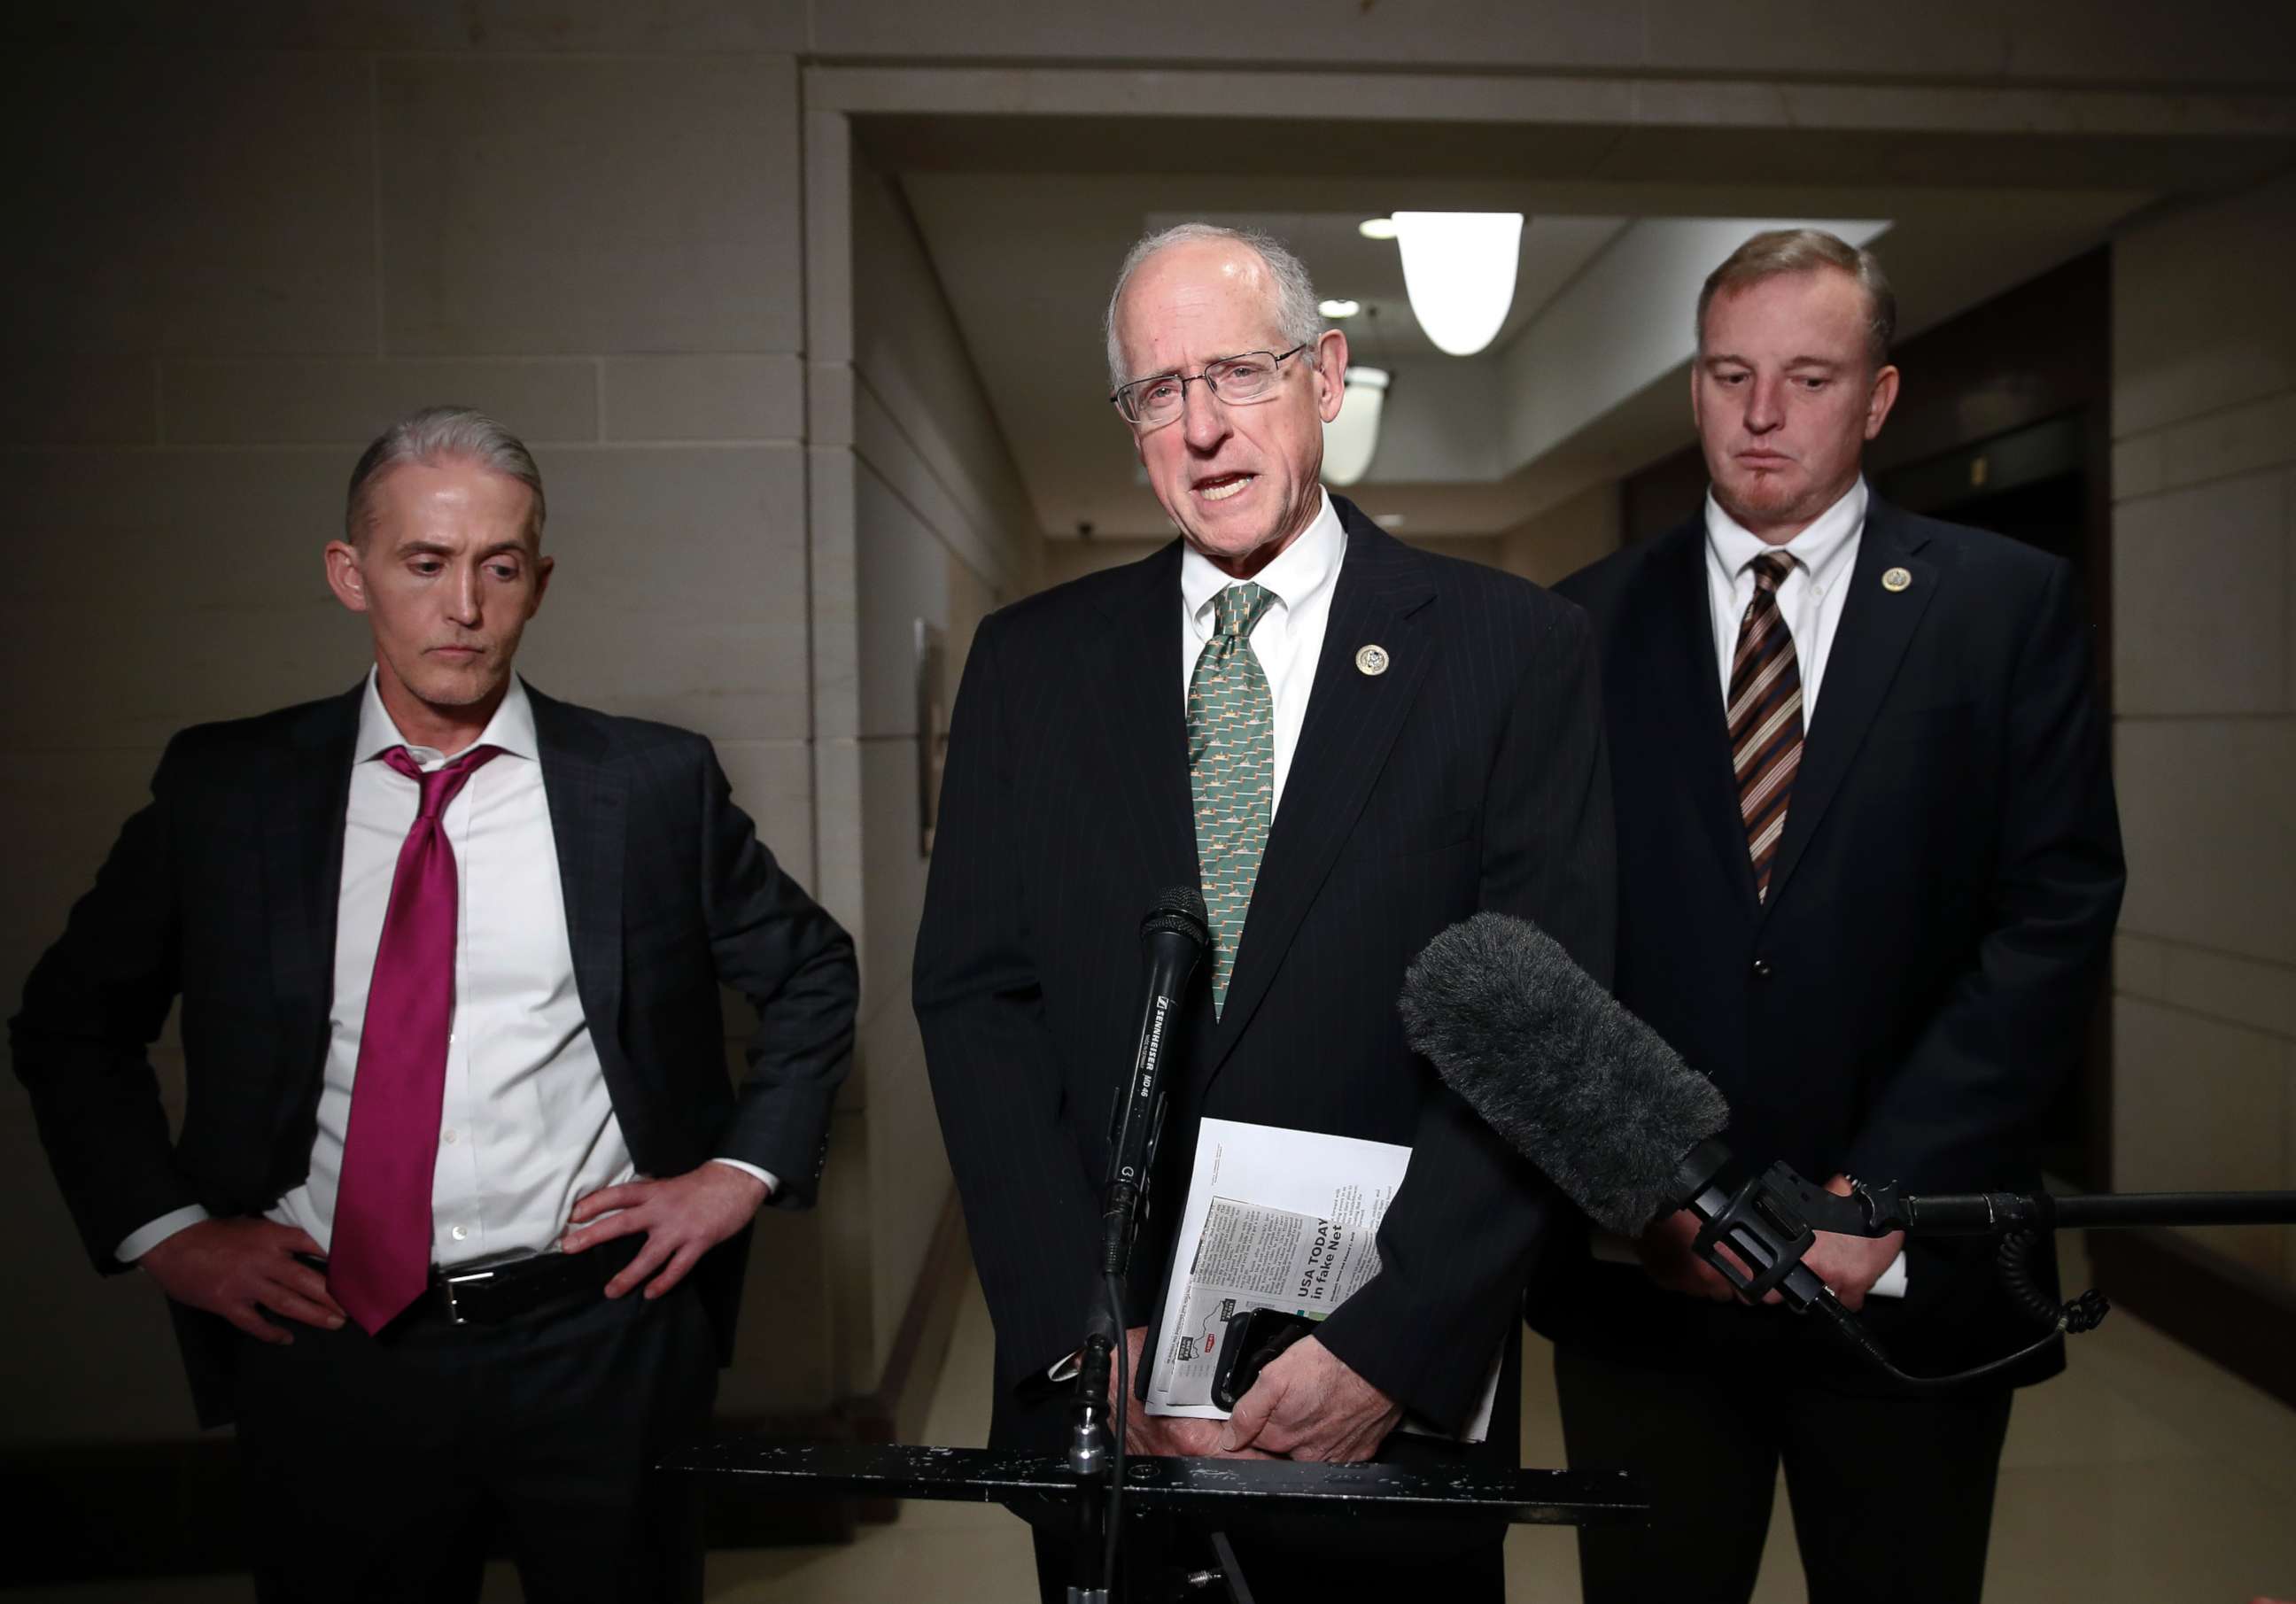 PHOTO: House Intelligence Committee member Rep. Mike Conaway, R-Texas, center, Rep. Tom Rooney, R-Fla., right, and Rep. Trey Gowdy, R-S.C., left, after House Intelligence Committee meeting where Donald Trump Jr., was interviewed, Wednesday, Dec. 6, 2017.